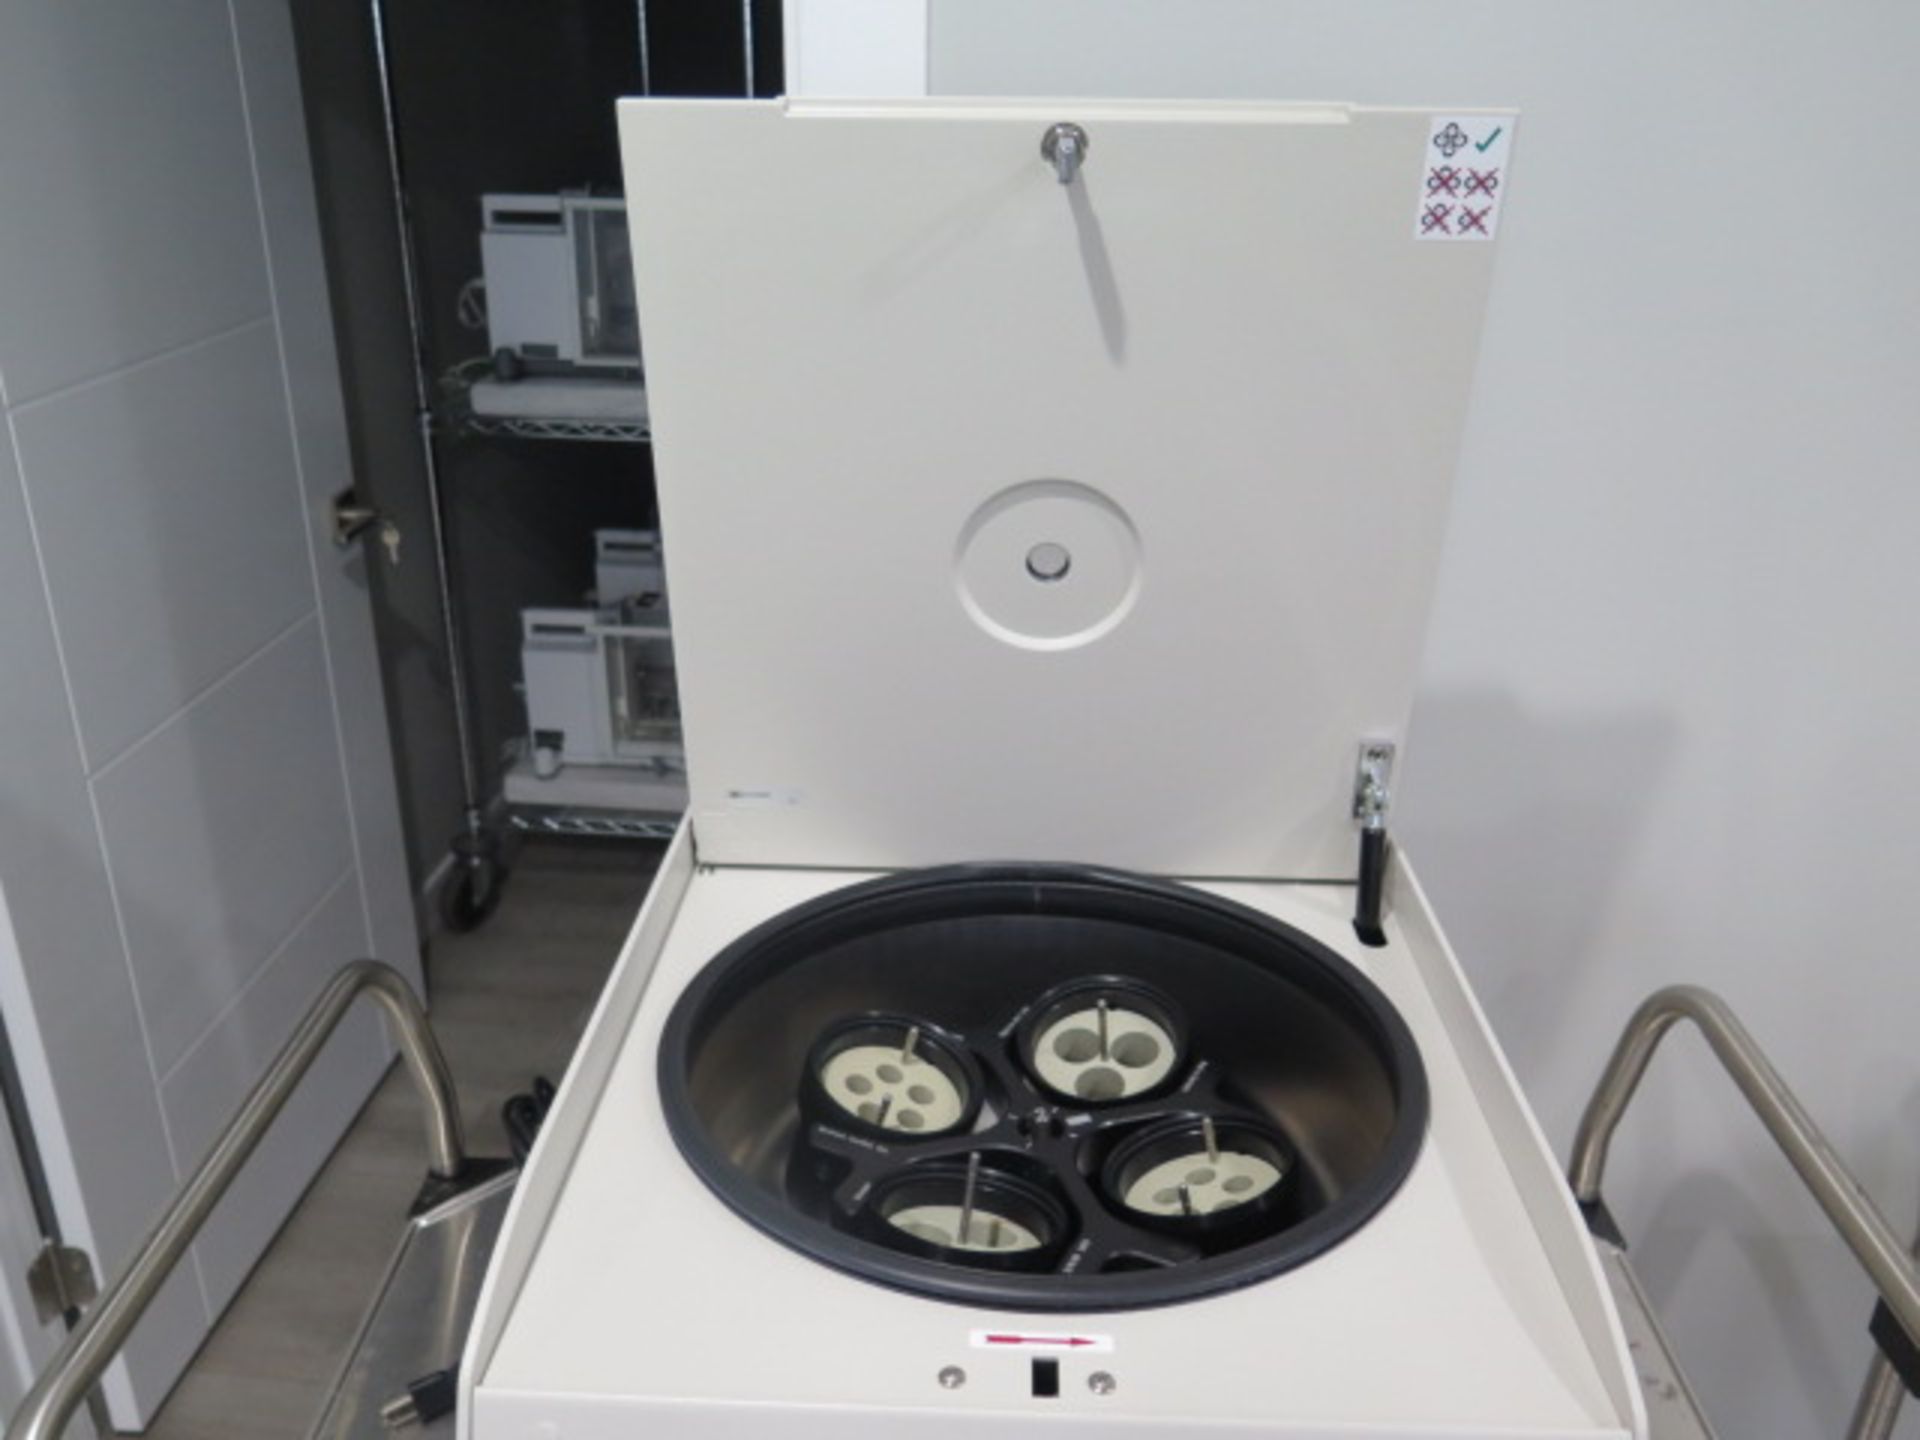 Beckman Coulter Allegra X-30R Centrifuge s/n ALZ19A083 (SOLD AS-IS - NO WARRANTY) - Image 4 of 11